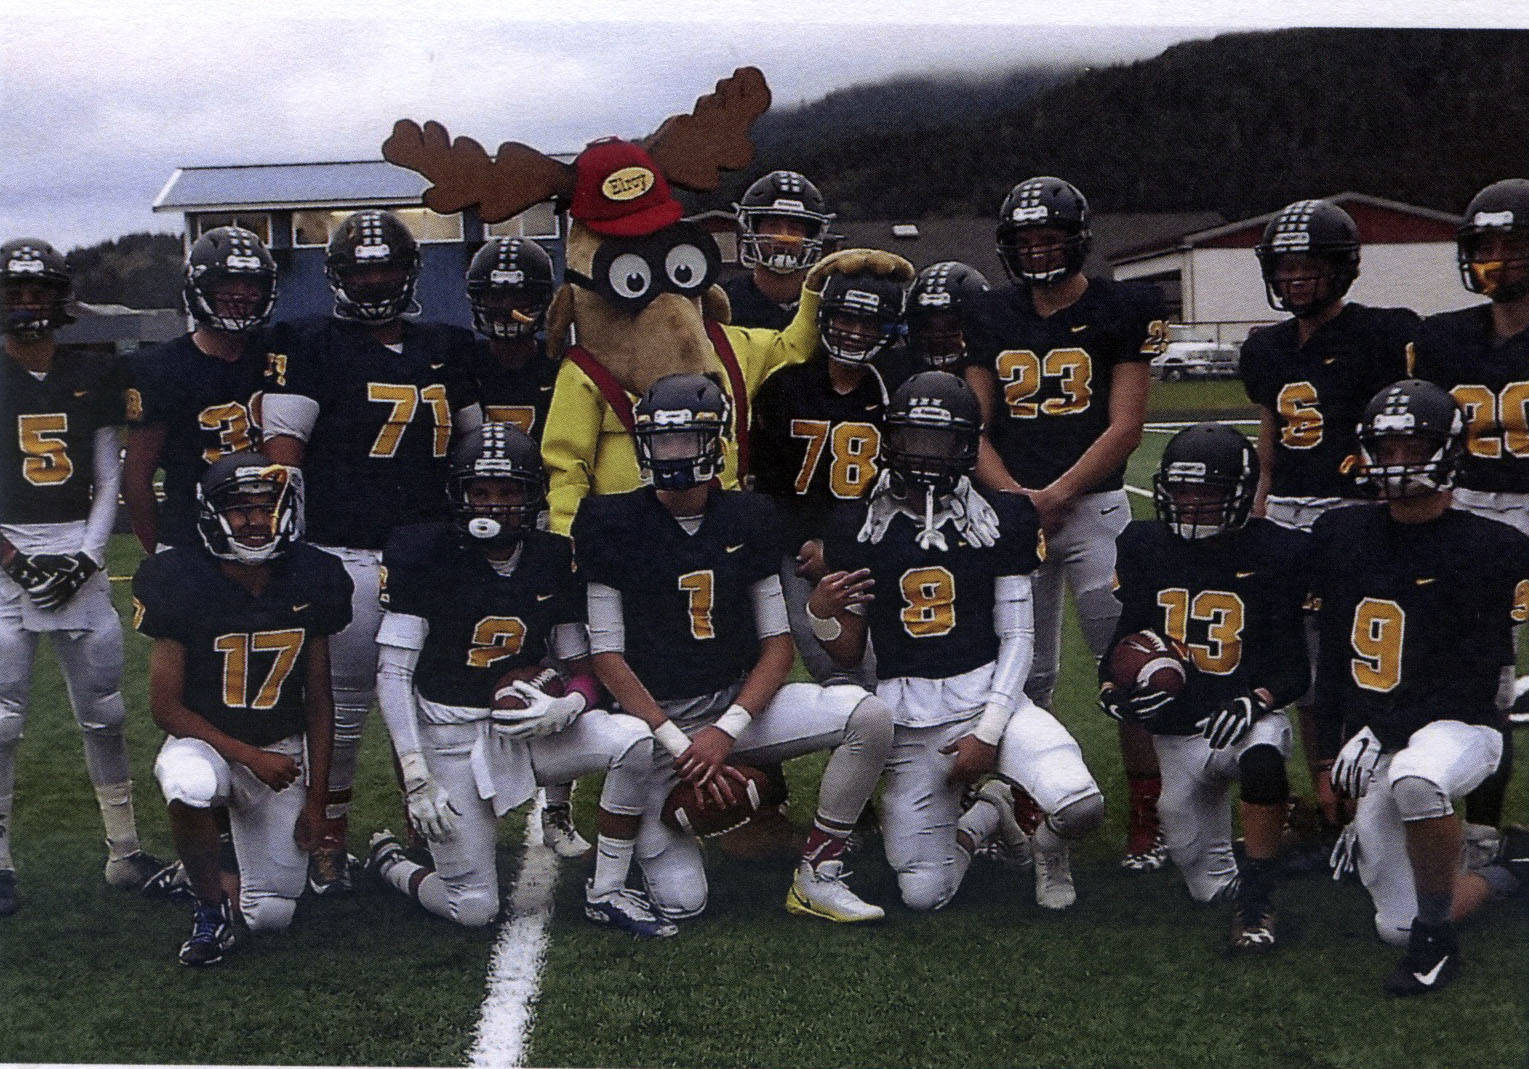 Elroy with the FHS Spartan team before the Homecoming game got underway. Submitted photos